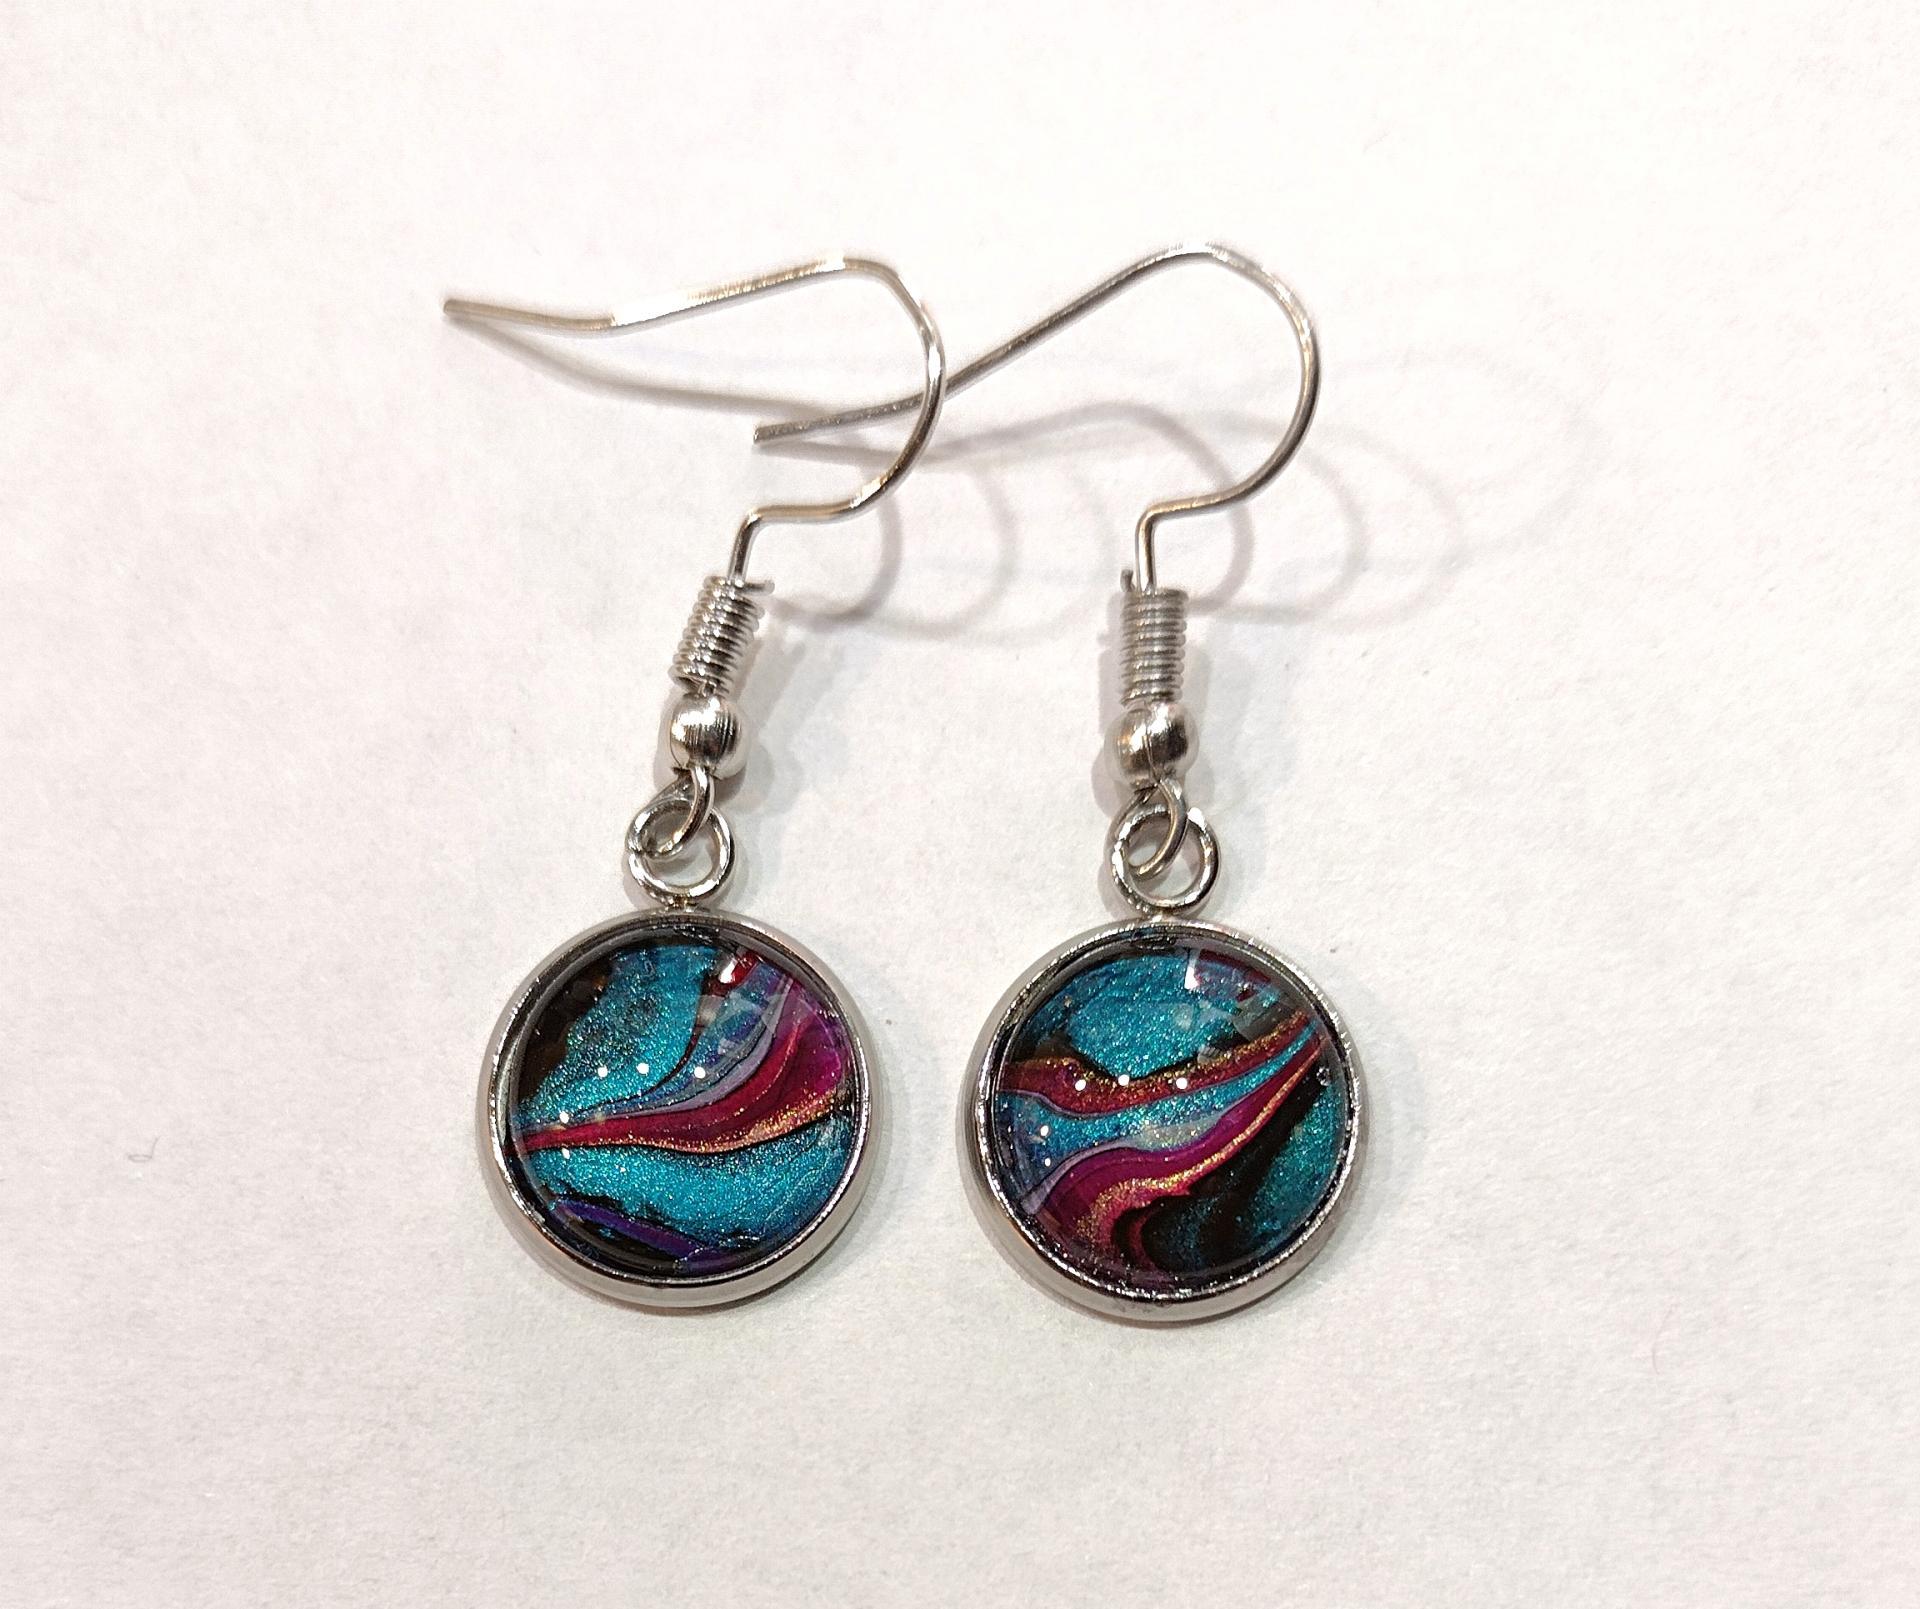 Painted Earrings, Turquoise, Pink and Black